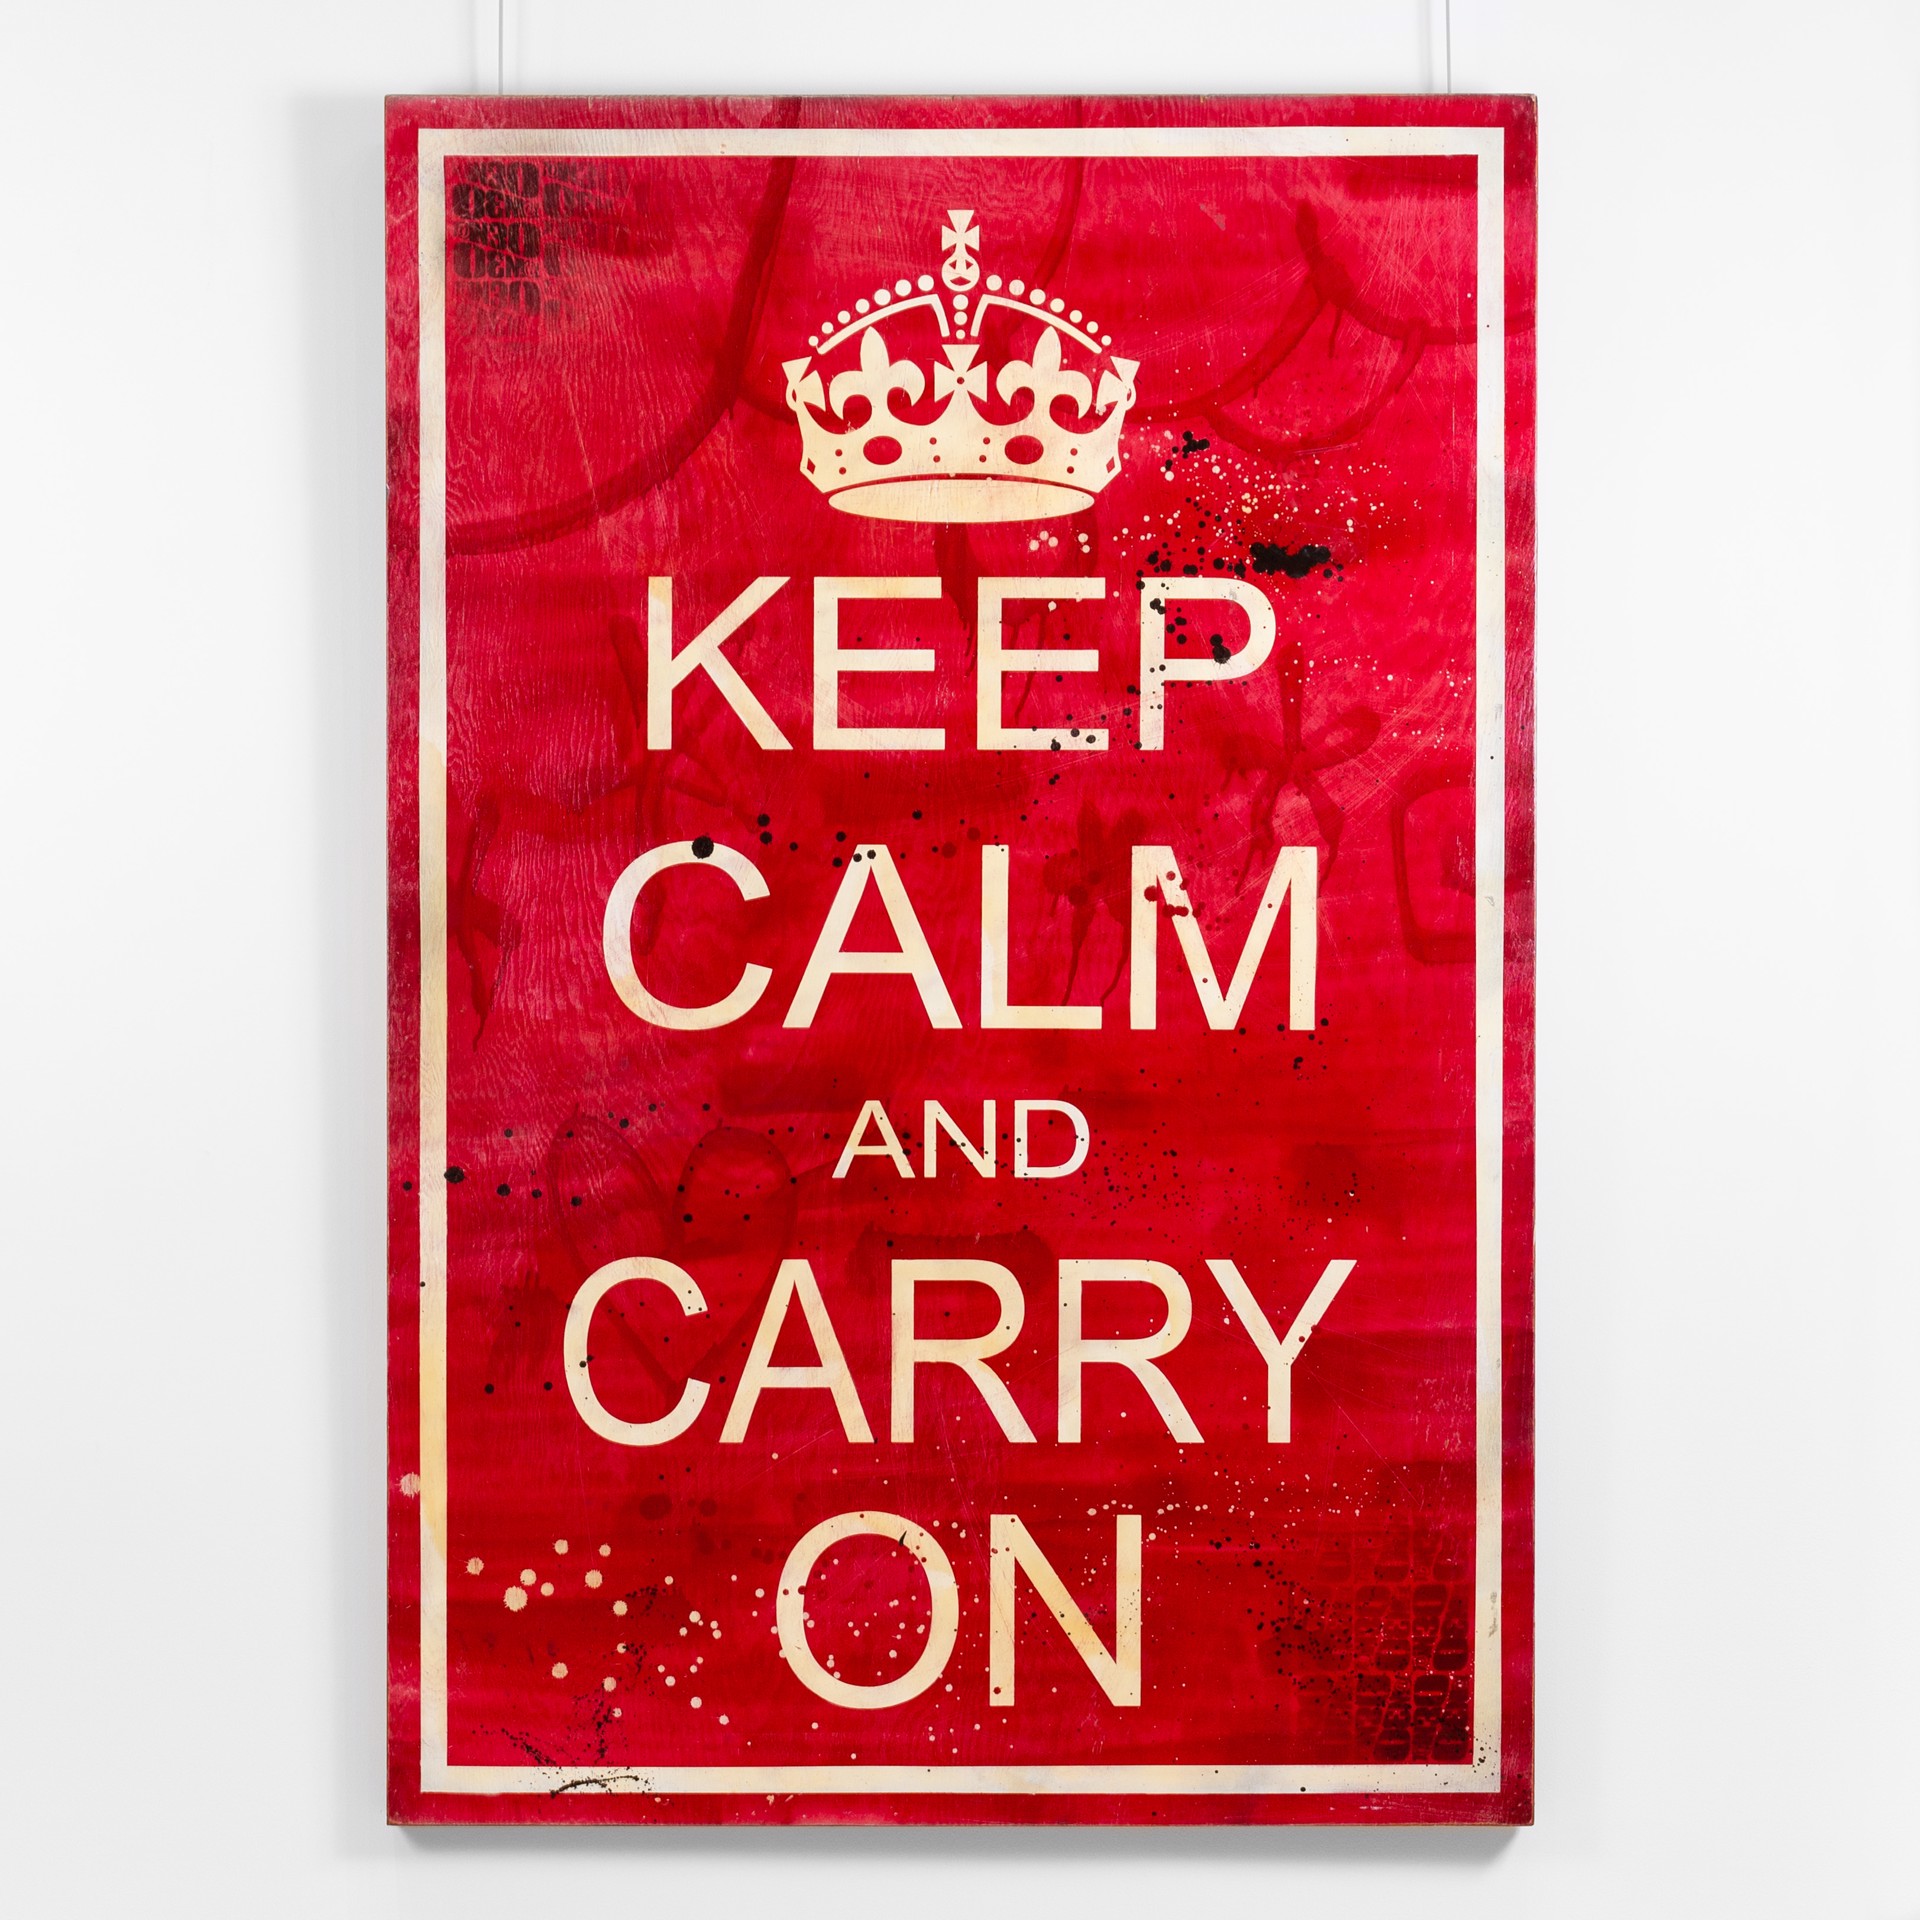 Keep Calm and Carry On by Denial | Originals